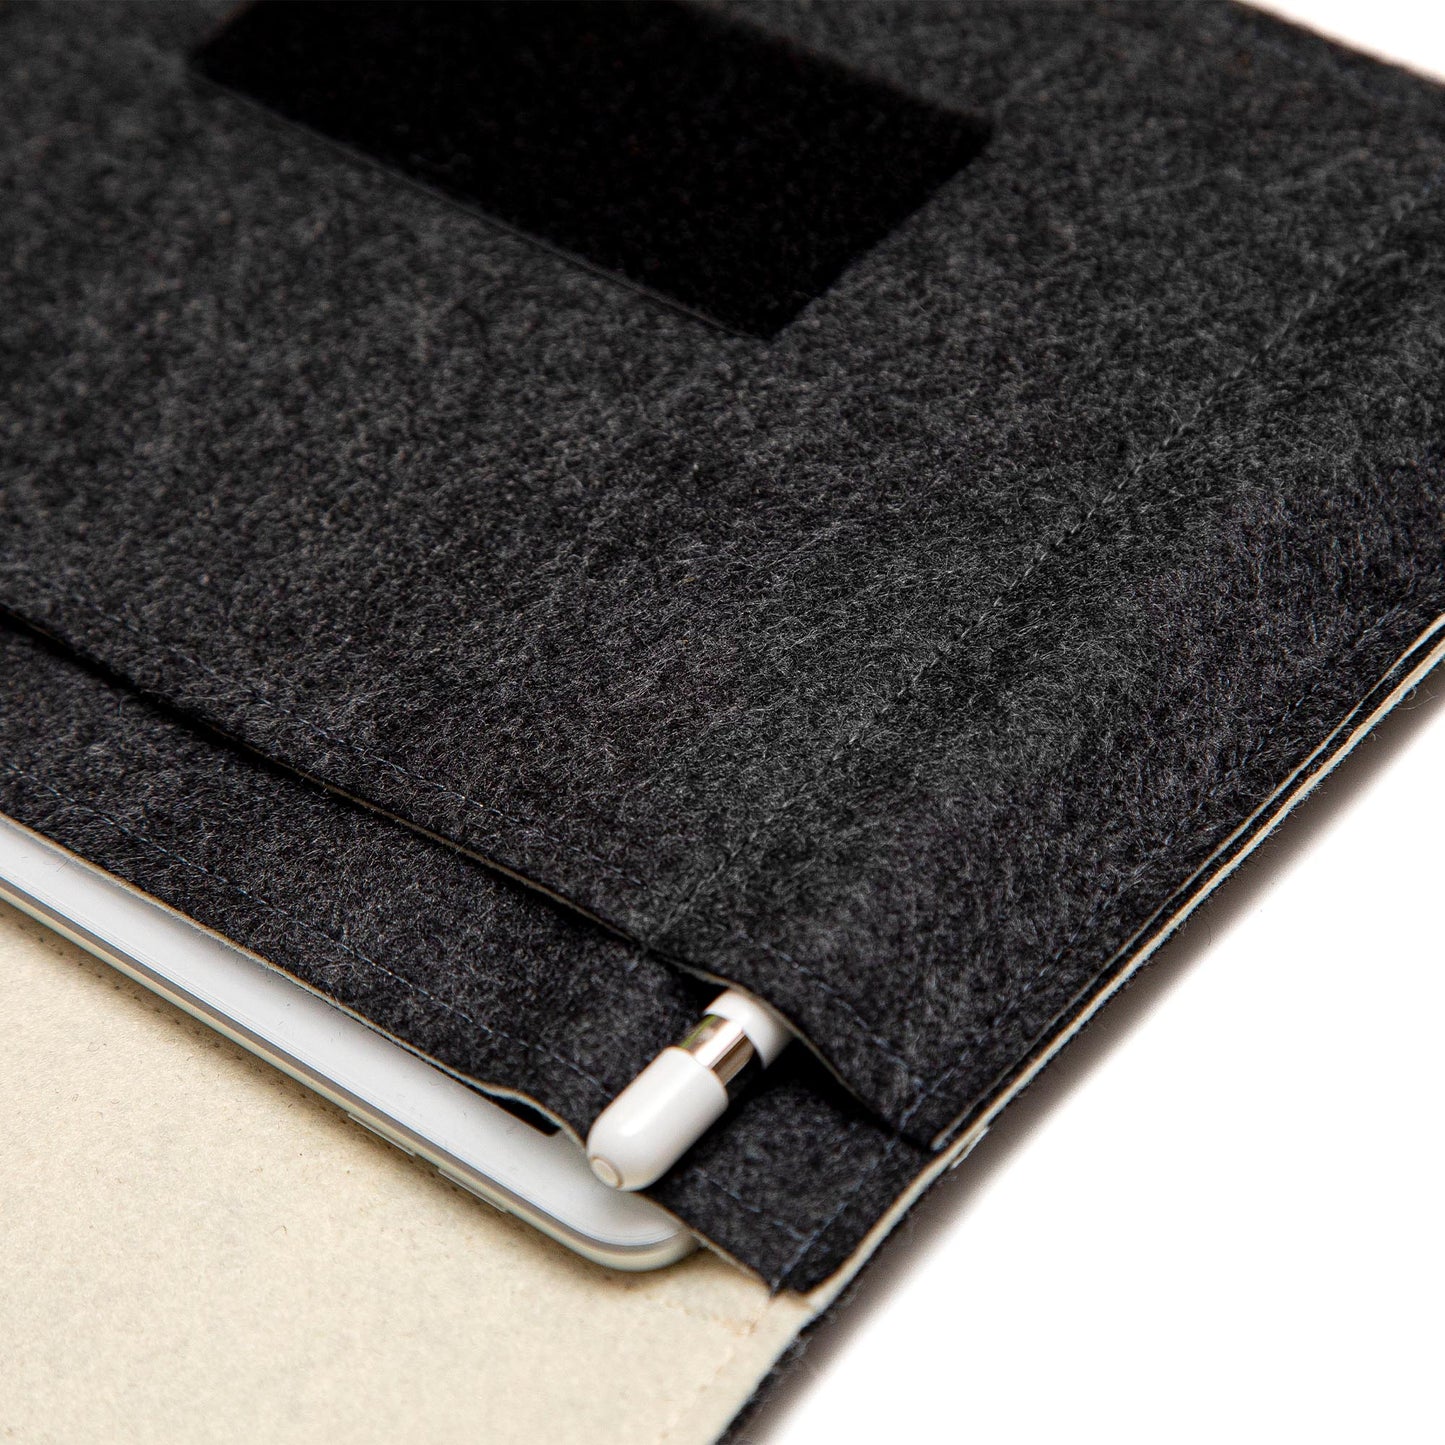 Premium Felt iPad Cover: Ultimate Protection with Accessories Pocket - Charcoal & Cream